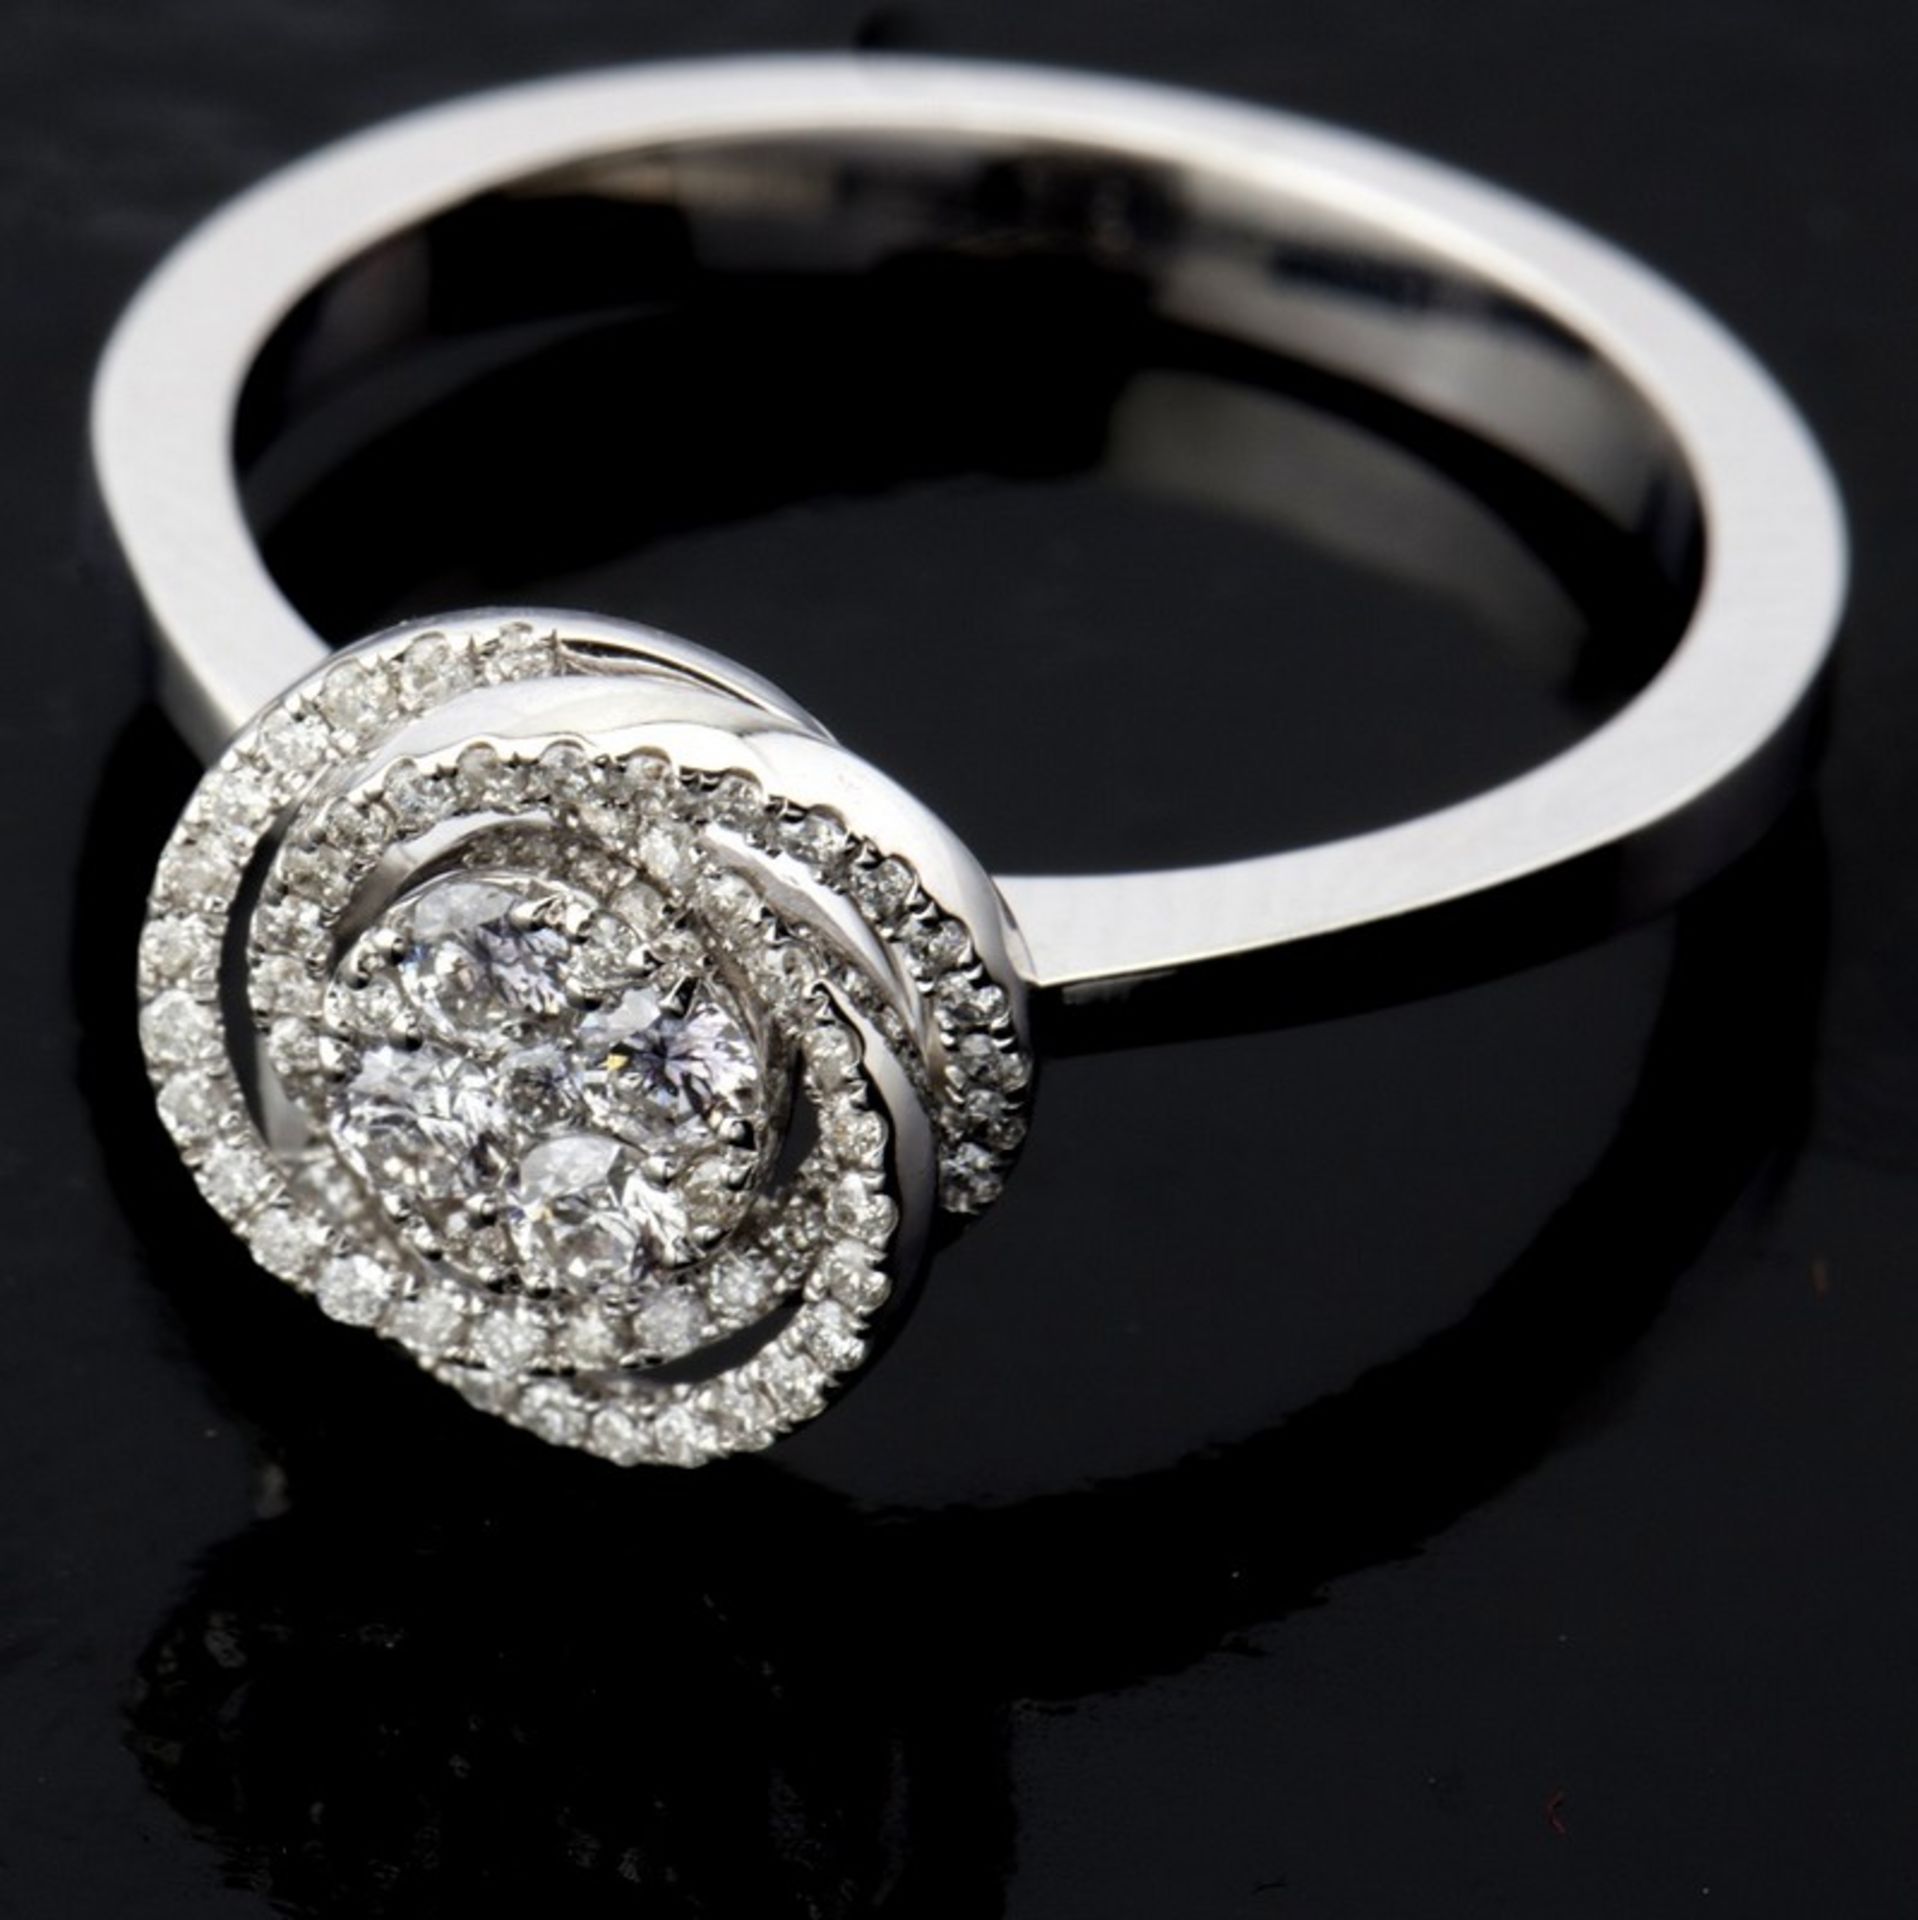 Certificated 14K White Gold Diamond Ring - Image 3 of 7